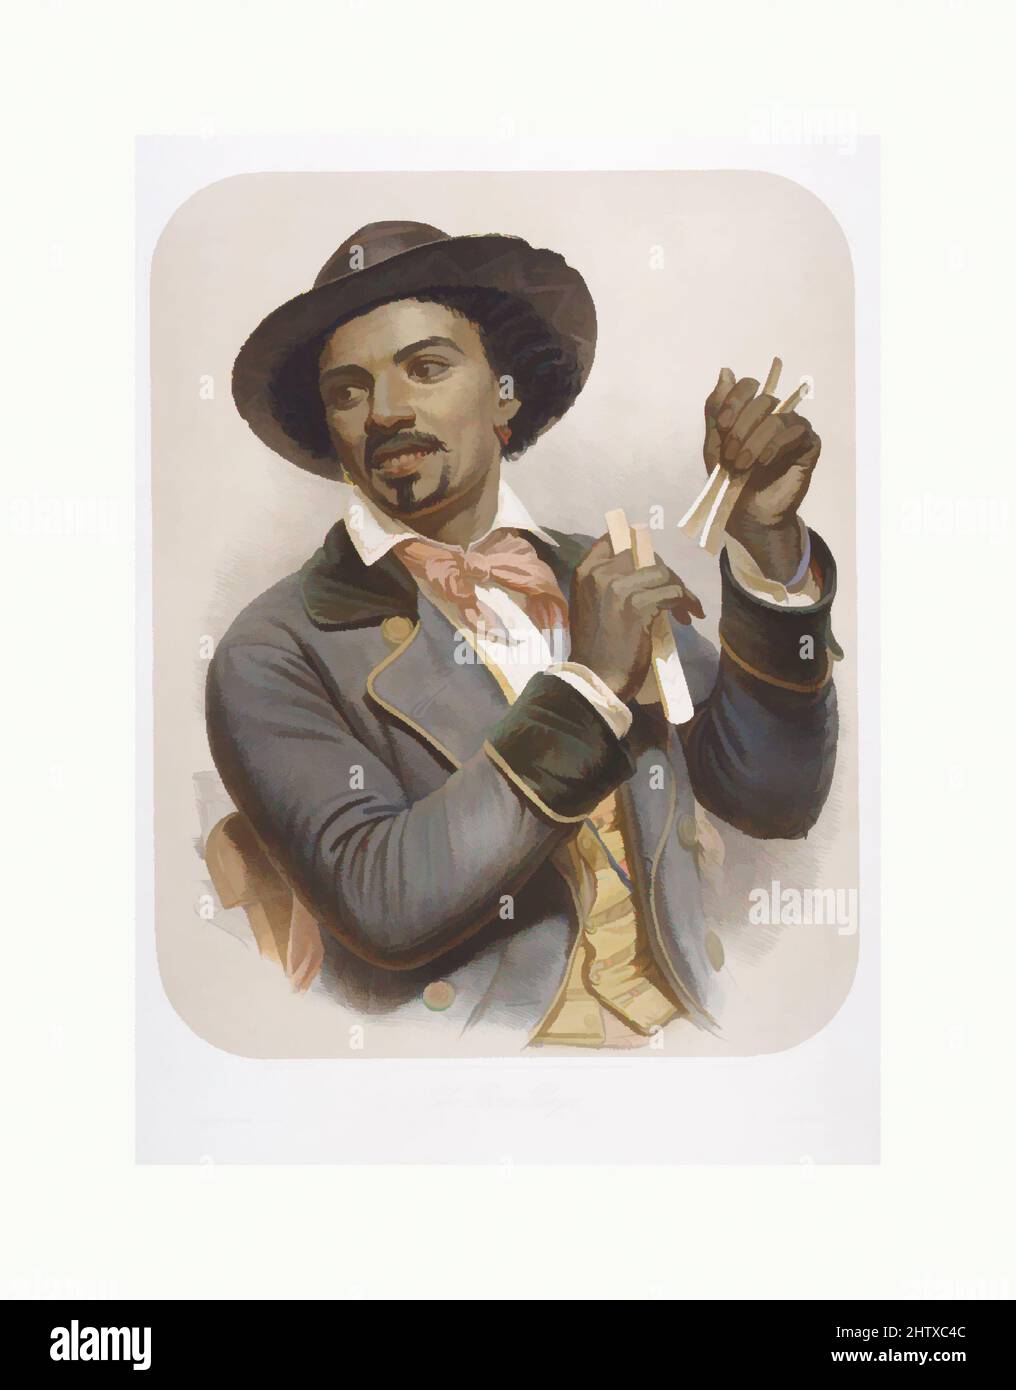 Art inspired by The Bone Player, 1857, Hand-colored lithograph, image: 25 x 19 3/4 in. (63.5 x 50.2 cm), Prints, After William Sidney Mount (American, Setauket, New York 1807–1868 Setauket, New York, Classic works modernized by Artotop with a splash of modernity. Shapes, color and value, eye-catching visual impact on art. Emotions through freedom of artworks in a contemporary way. A timeless message pursuing a wildly creative new direction. Artists turning to the digital medium and creating the Artotop NFT Stock Photo